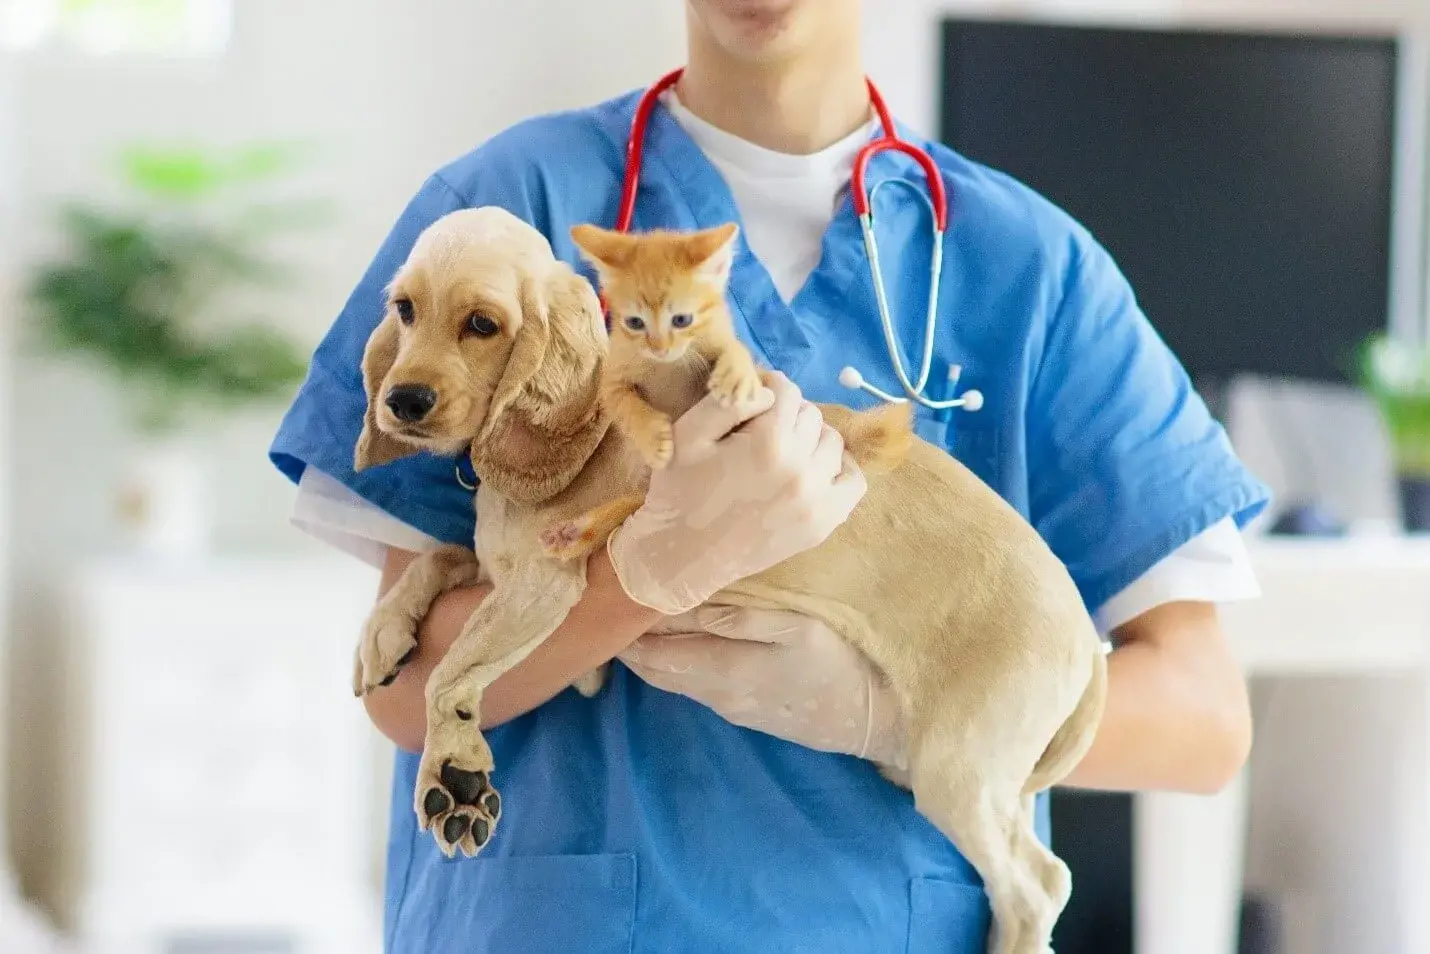 Vet holding a dog and a cat 